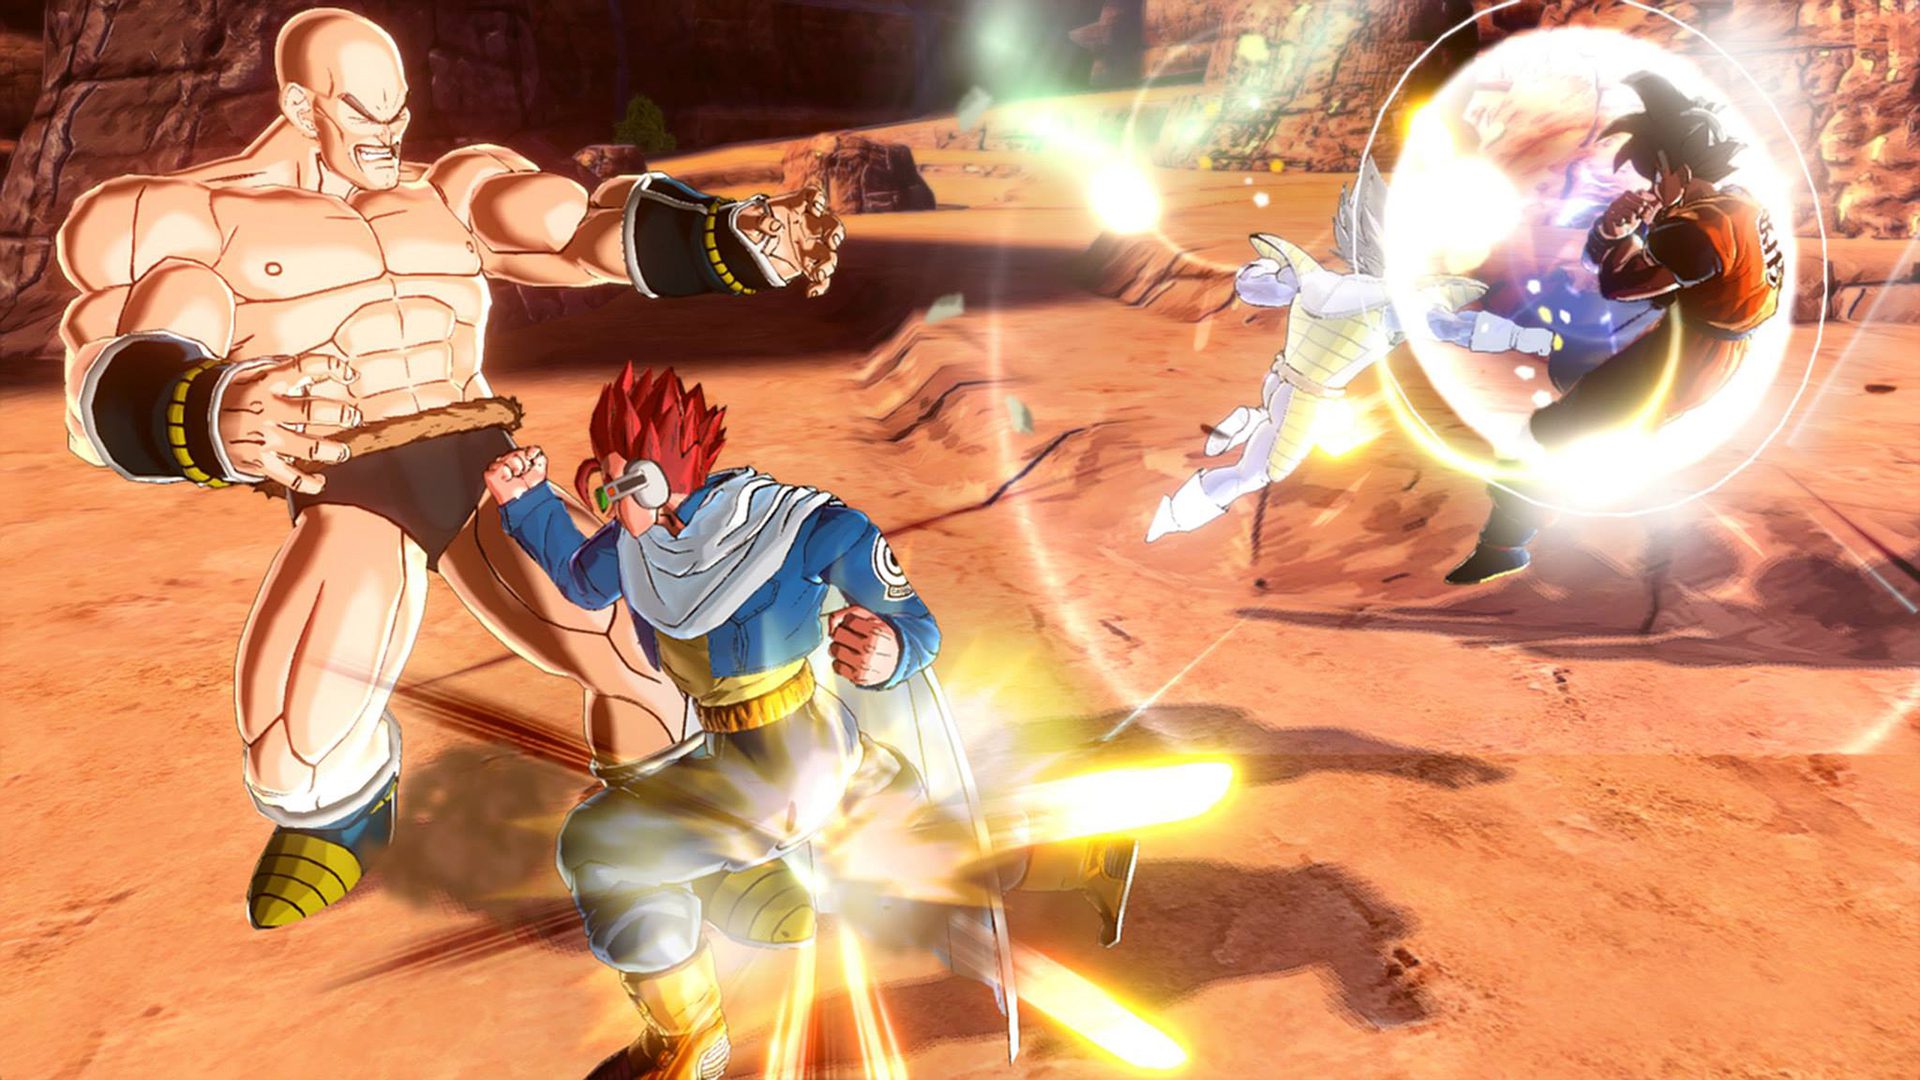 1403541730-dragon-ball-xenoverse-7-dragon-ball-xenoverse-have-japan-s-reviews-confirmed-z-s-hype